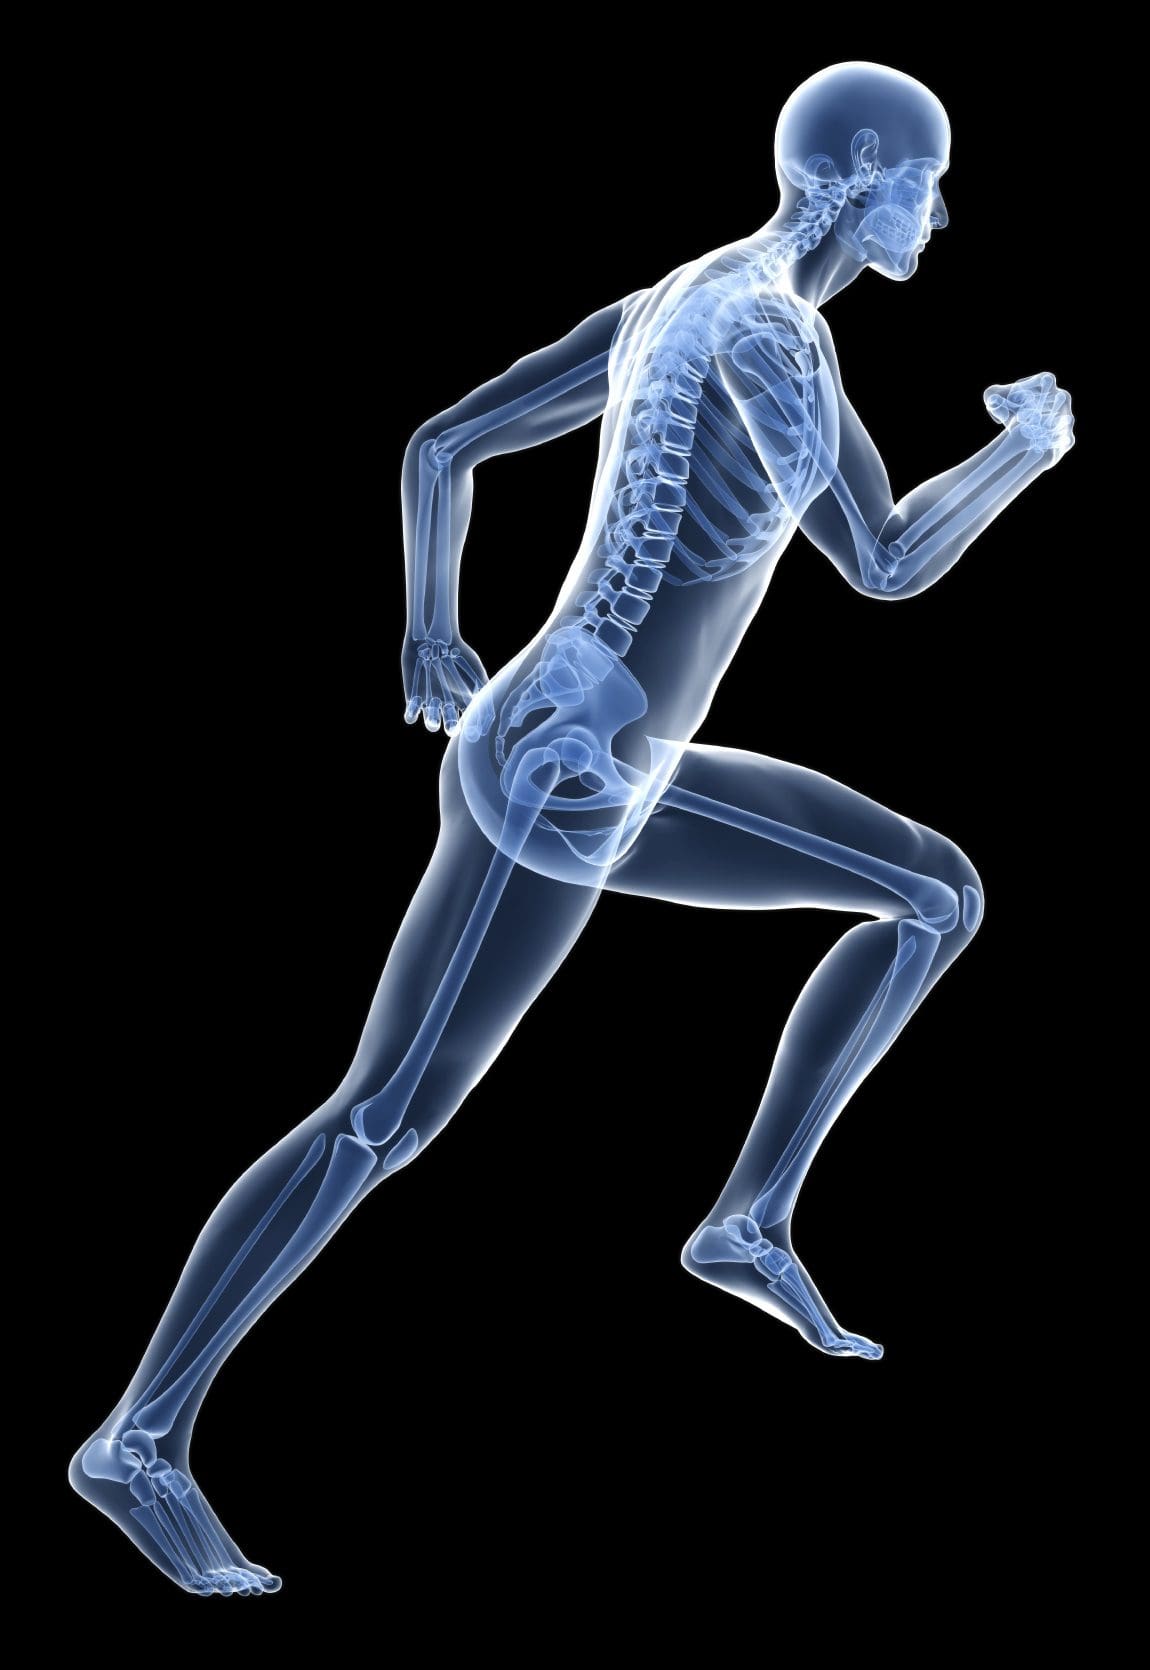 Health and Wellness: Bone Health - El Paso Personal Injury Physicians 915-850-0900